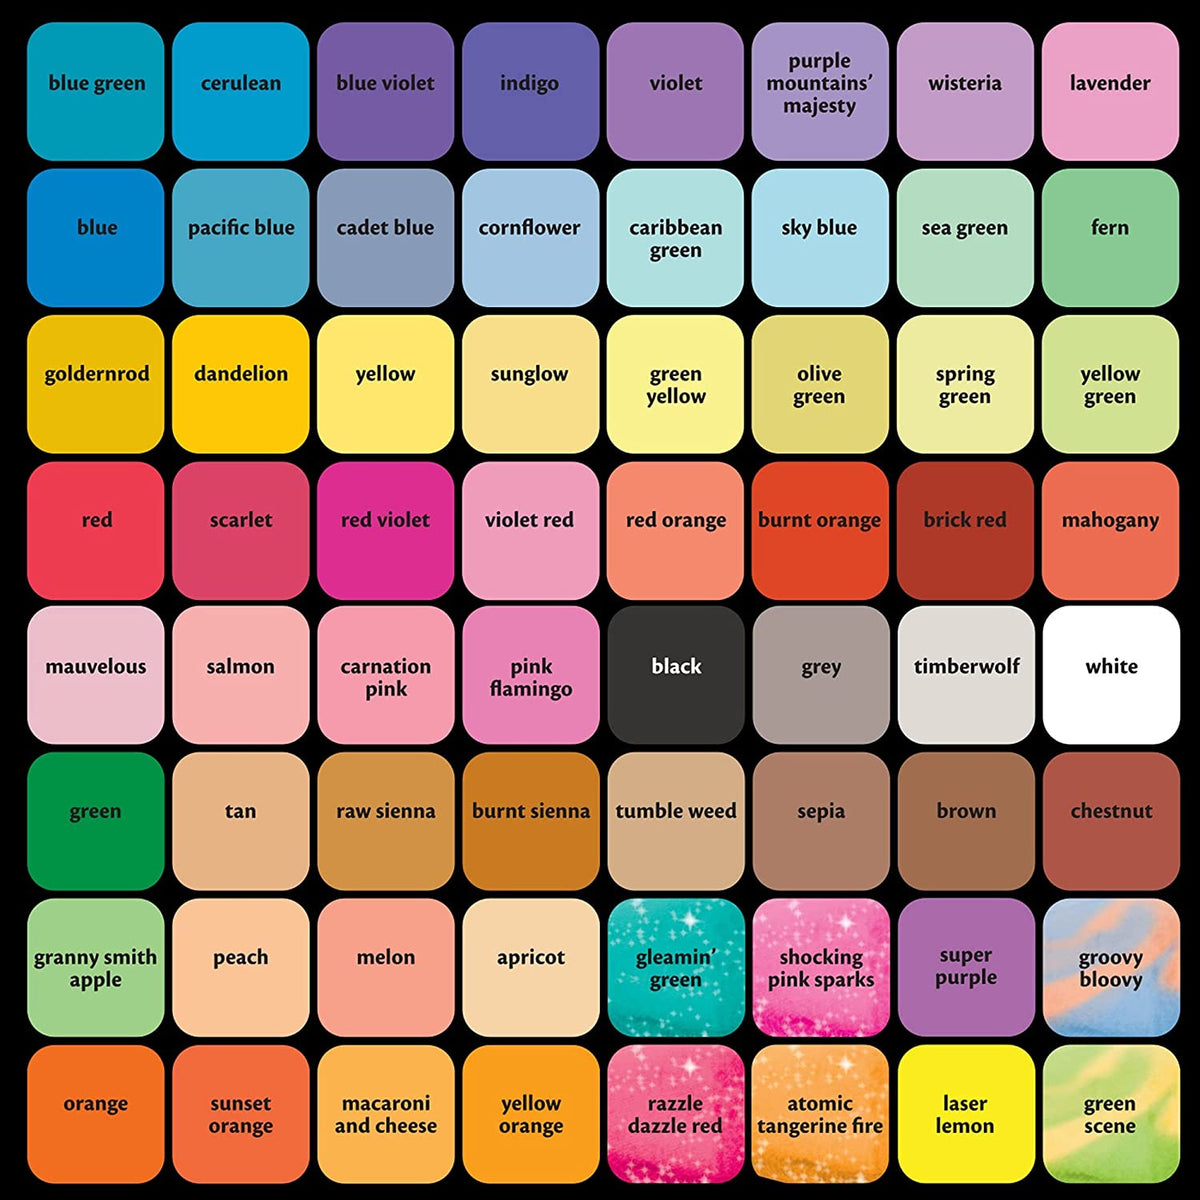 Front view of a color chart showing all 64 colors of the Crayola 64 count Ultimate Washable Sidewalk Chalk.